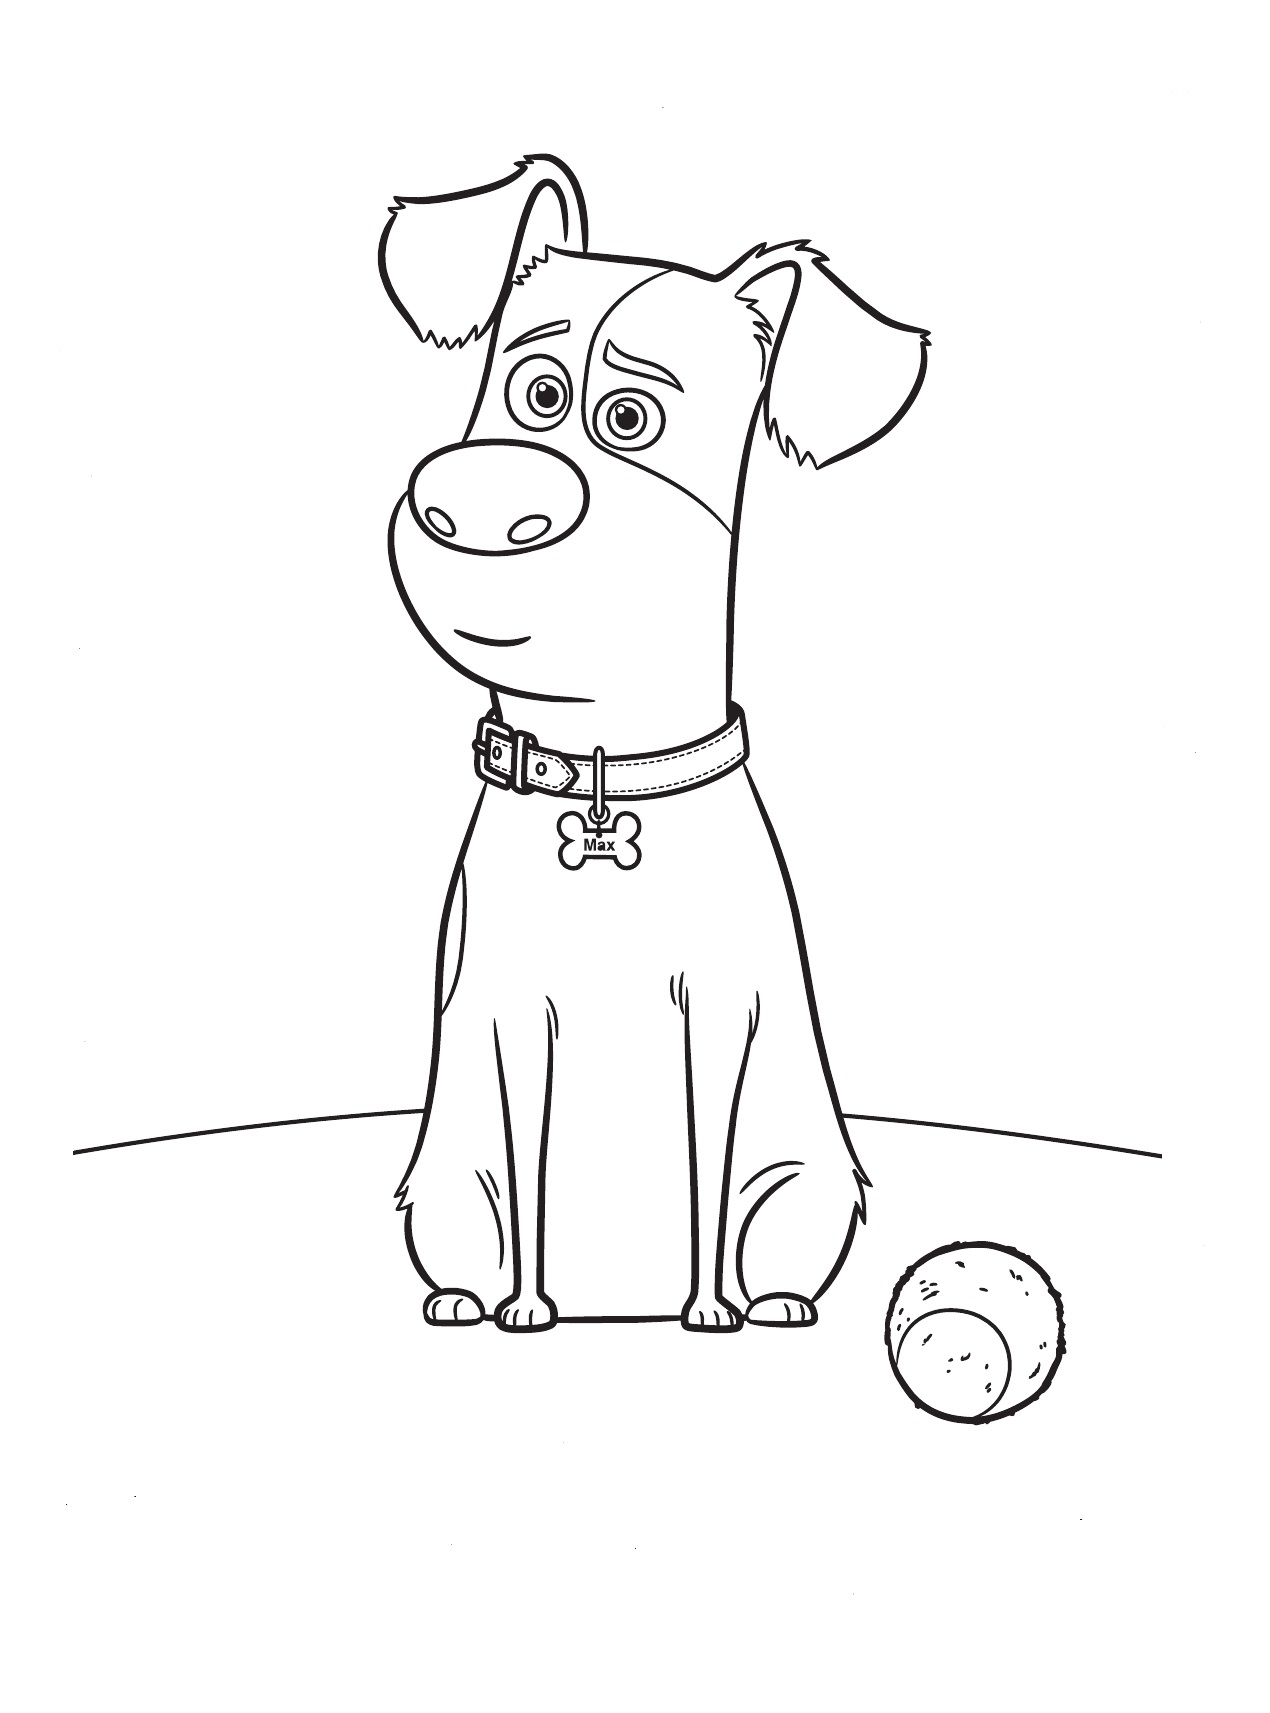 Download The Secret Life Of Pets Coloring Pages Print Them For Free